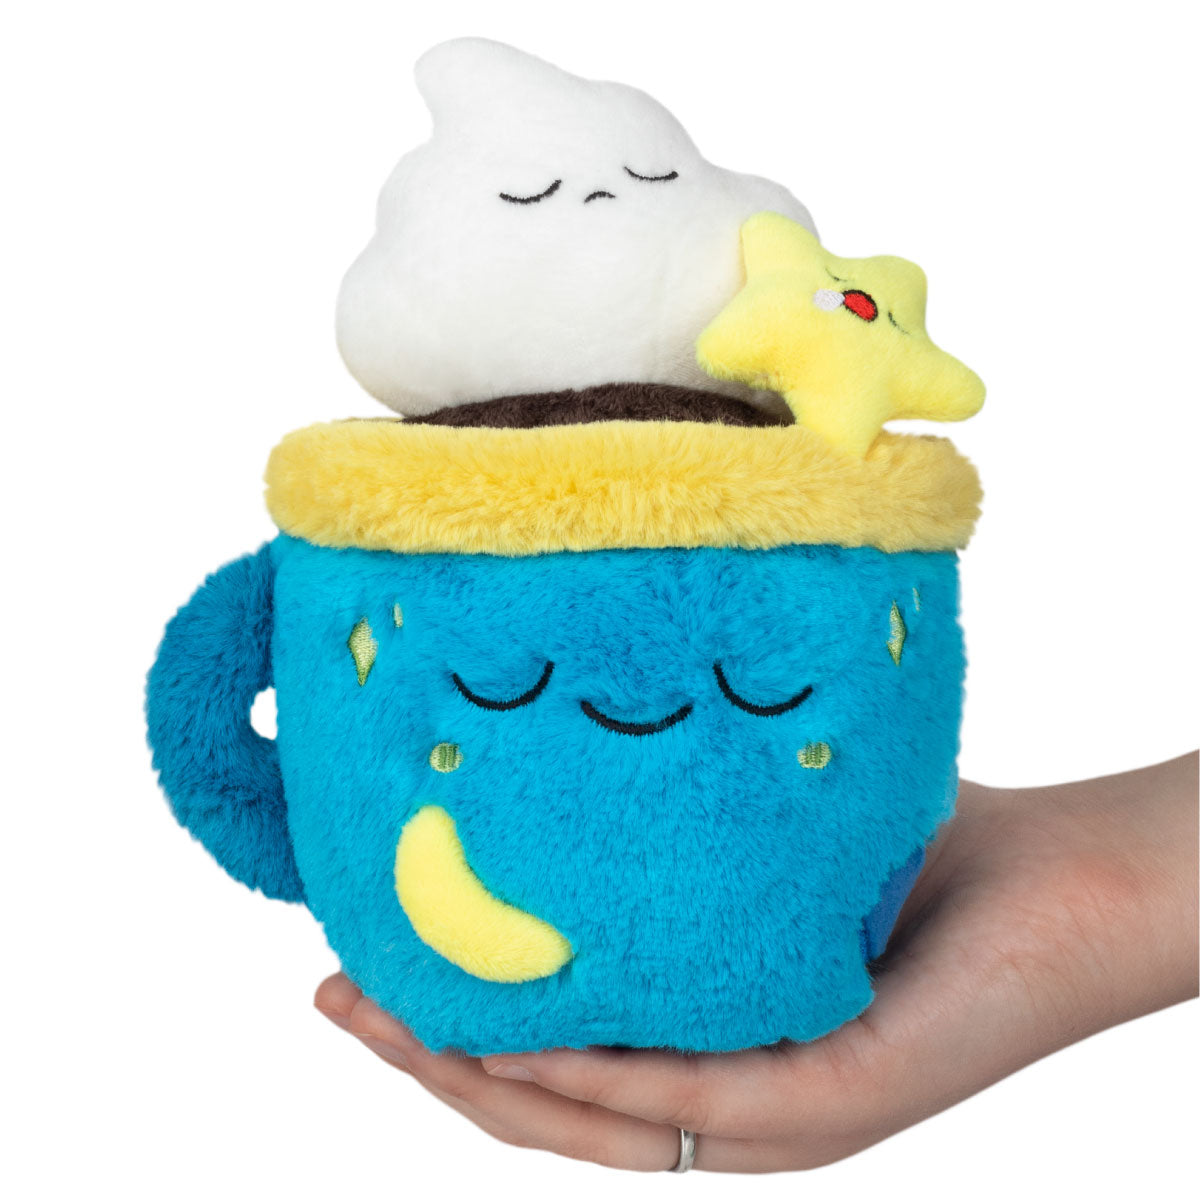 Squishable Alter Egos Coffees 5” Decaf